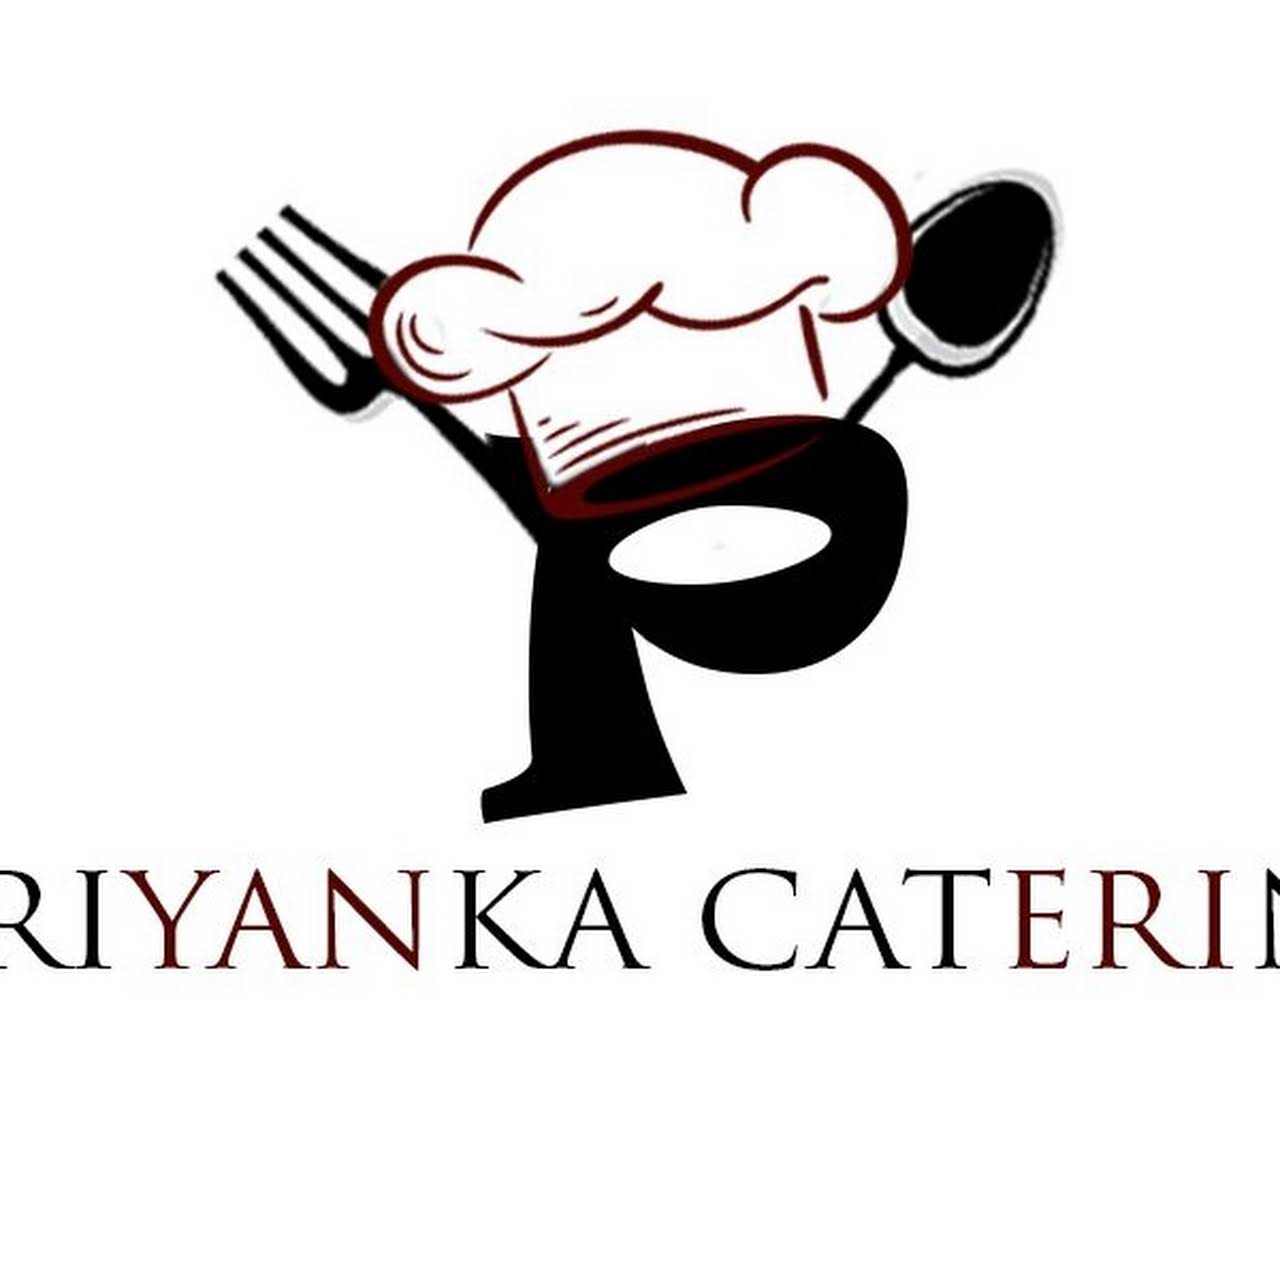 Priyanka Suppliers& caterings|Catering Services|Event Services